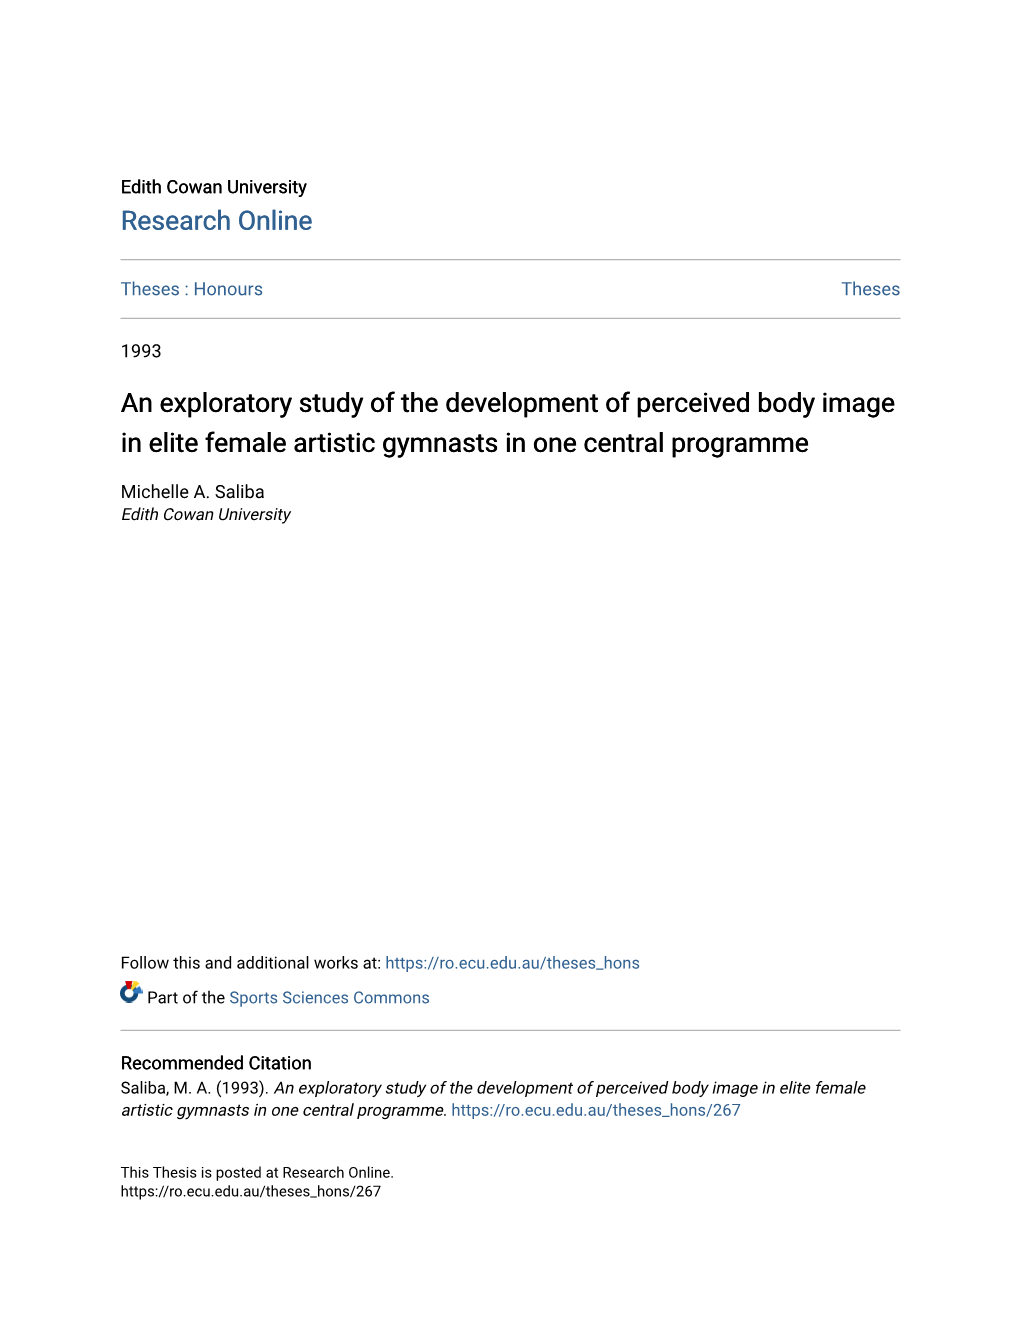 An Exploratory Study of the Development of Perceived Body Image in Elite Female Artistic Gymnasts in One Central Programme